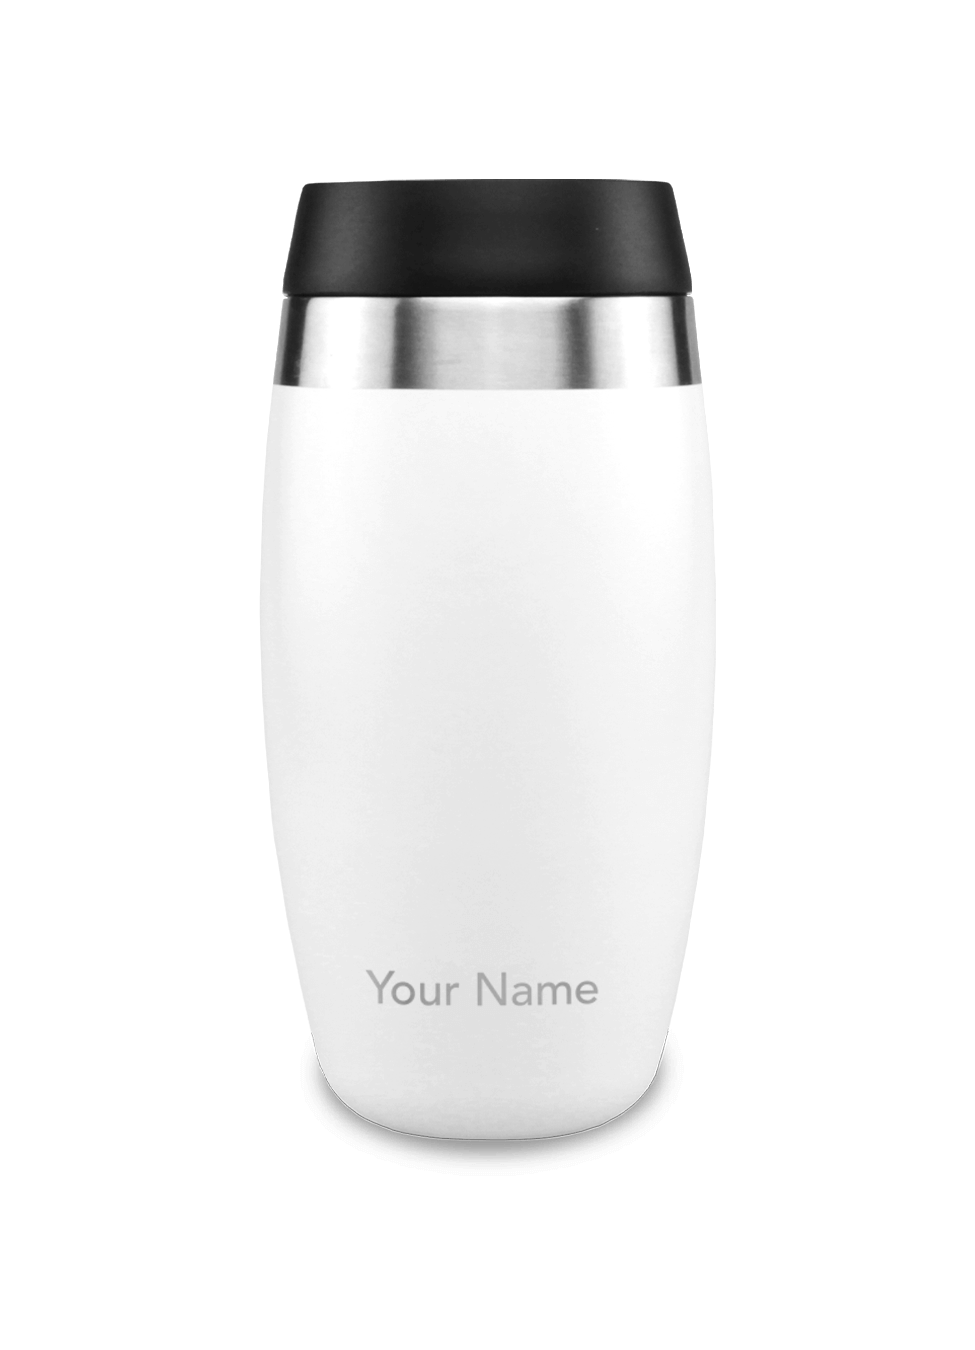 Dishwasher safe personalised coffee cup in white